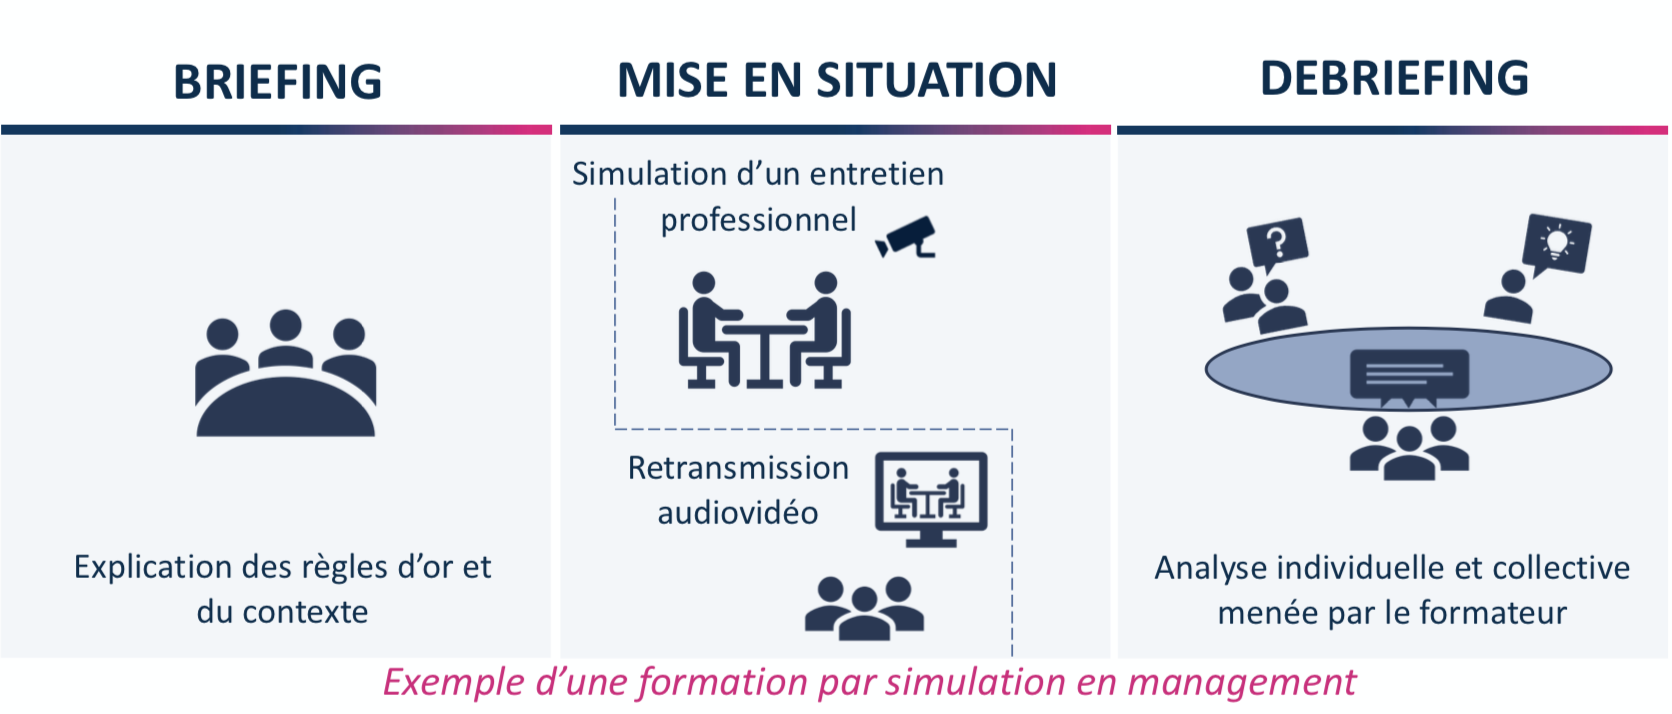 3 PHASES INFOGRAPHIE.png